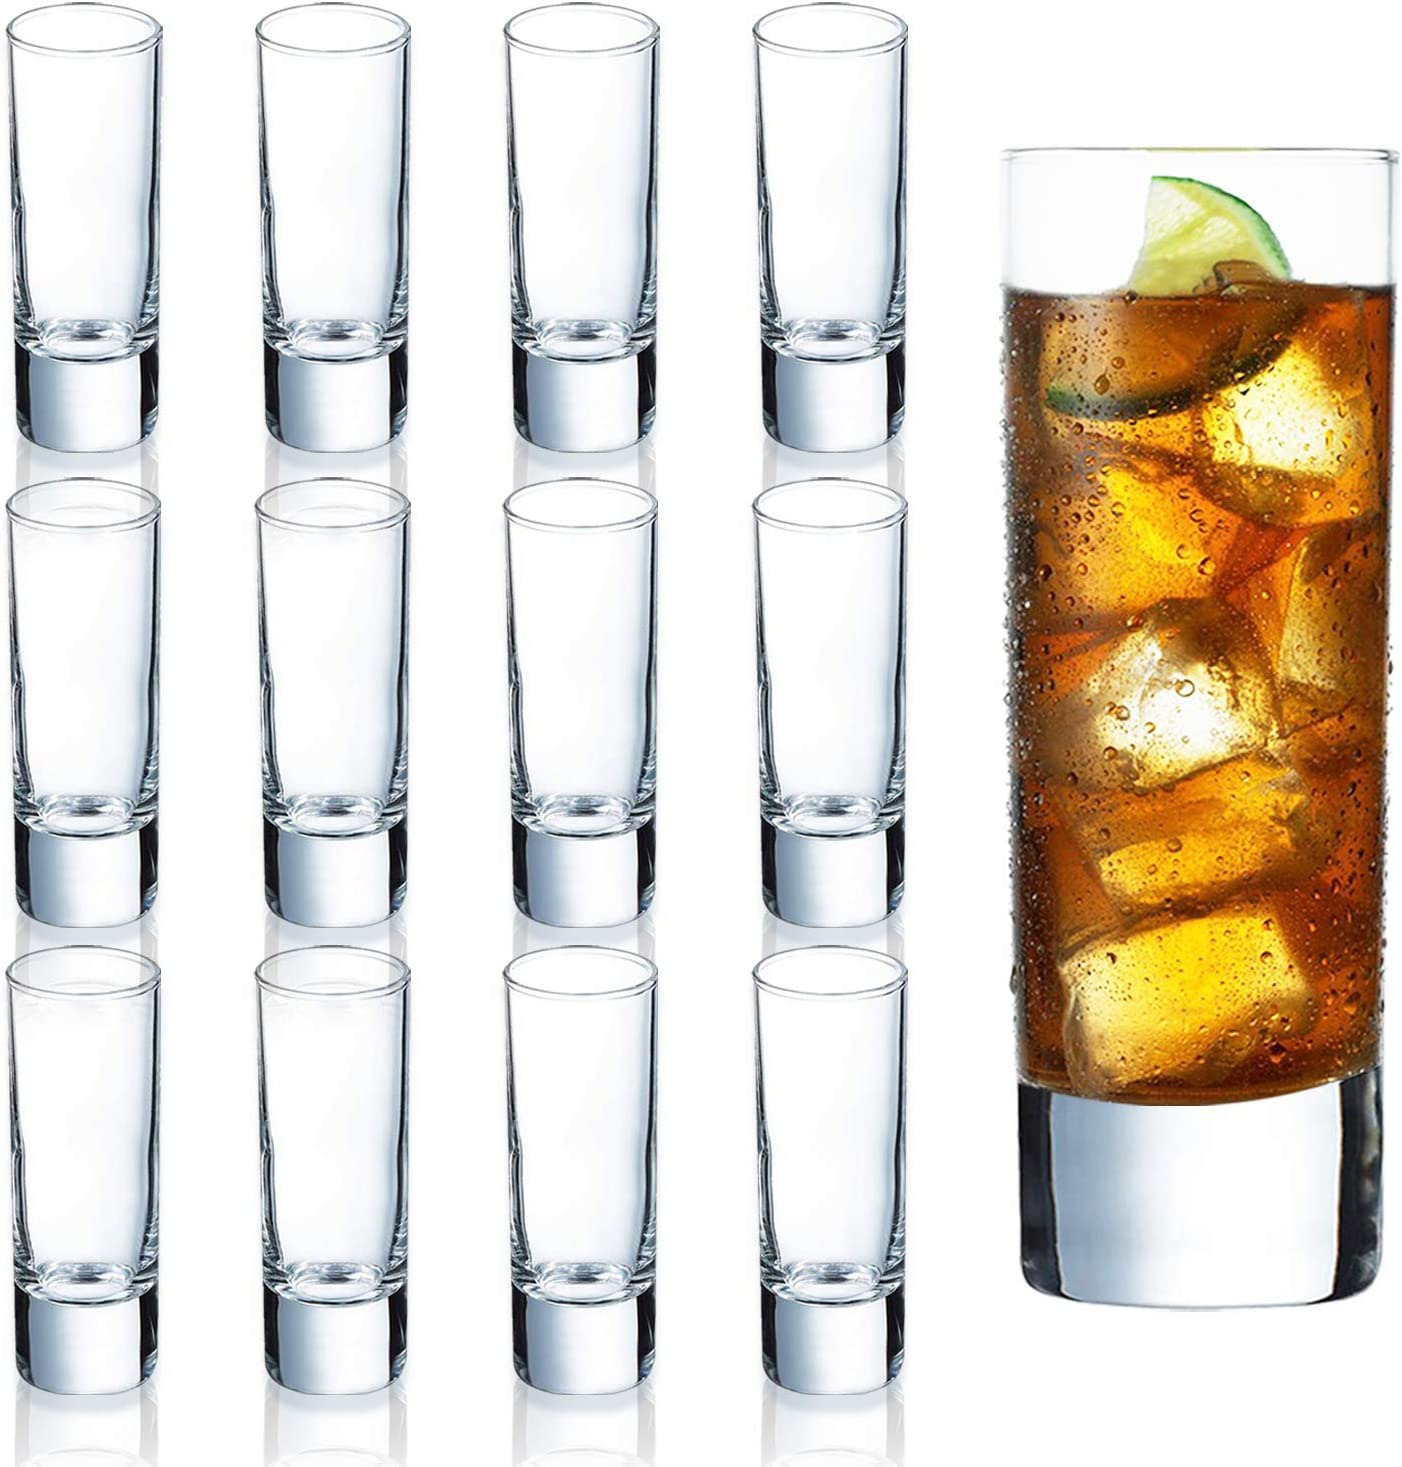 Clear Heavy Base Shot Glasses 12 Pack, 2 Oz Tall Glass Set for Whiskey, Tequila